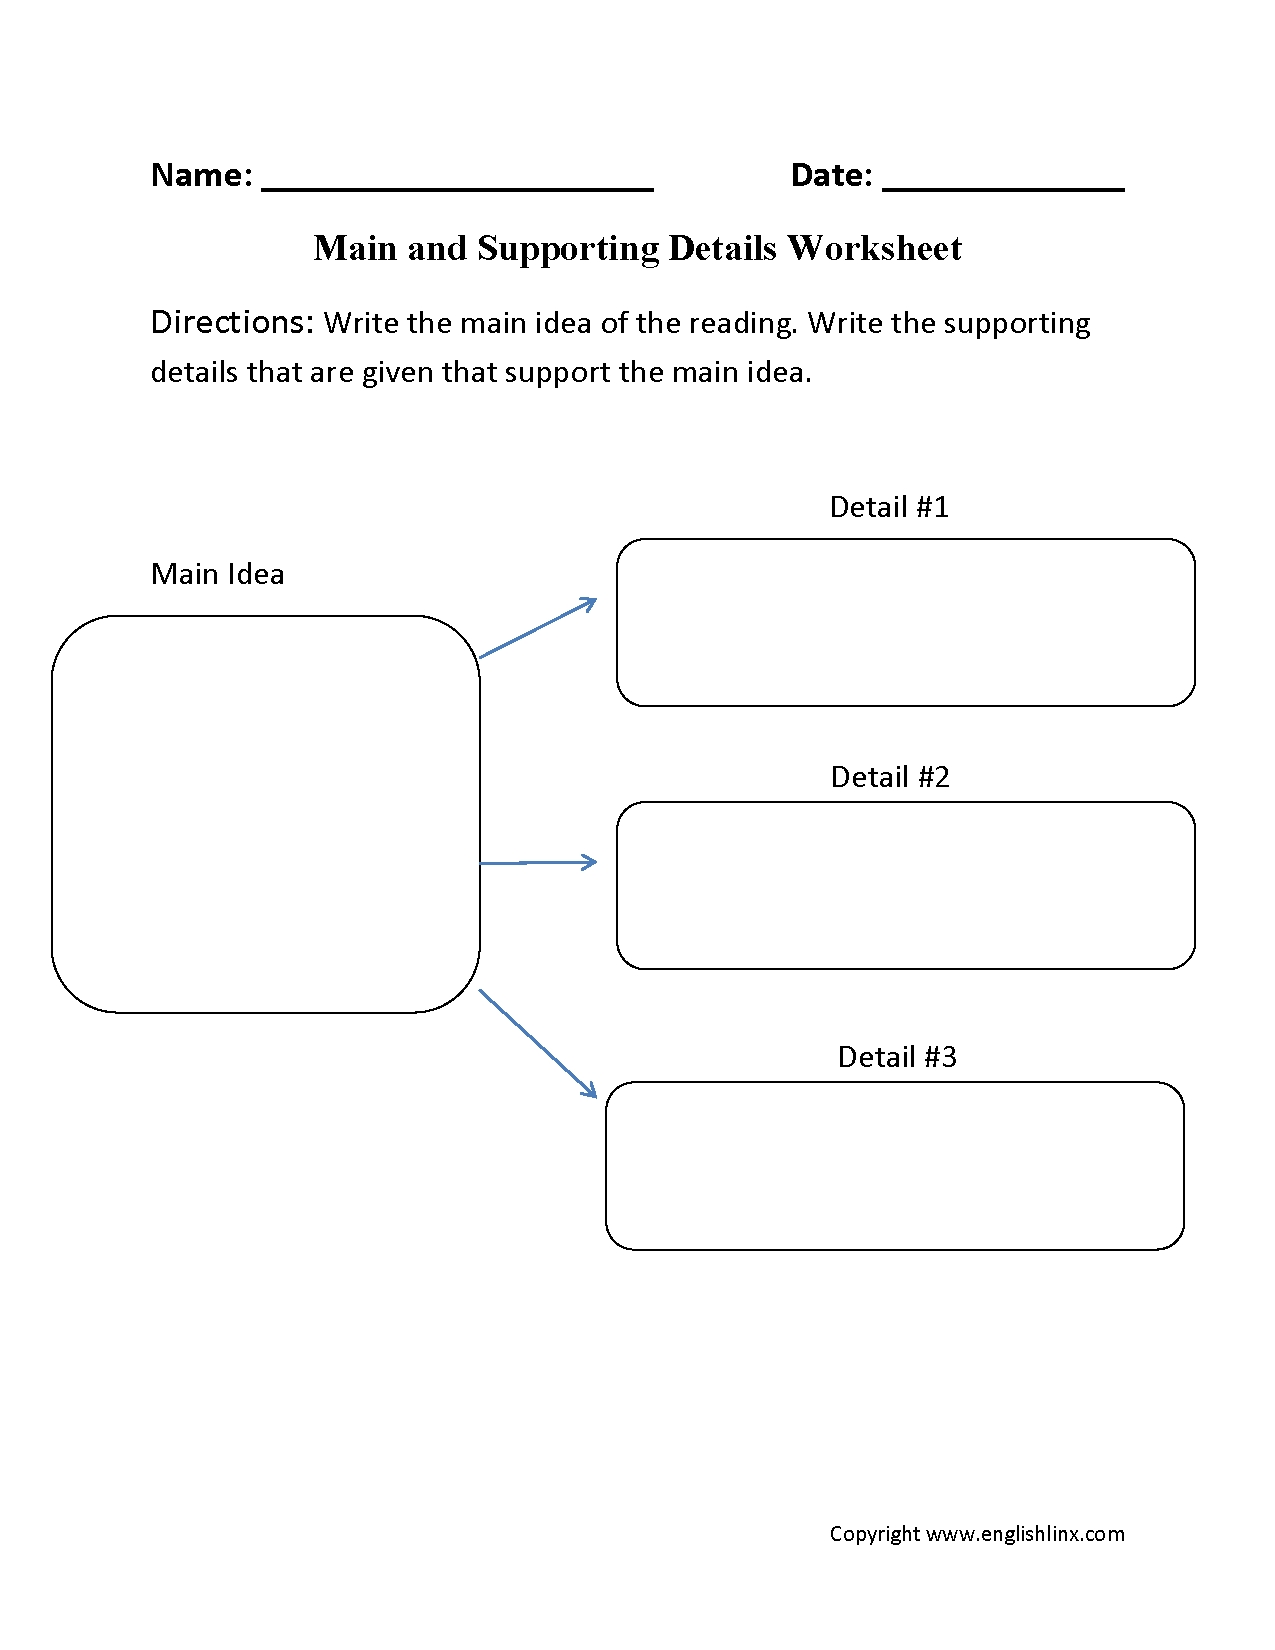 10 Most Popular Main Idea And Supporting Details Graphic Organizer main idea worksheets main idea and supporting details worksheet 1 2022